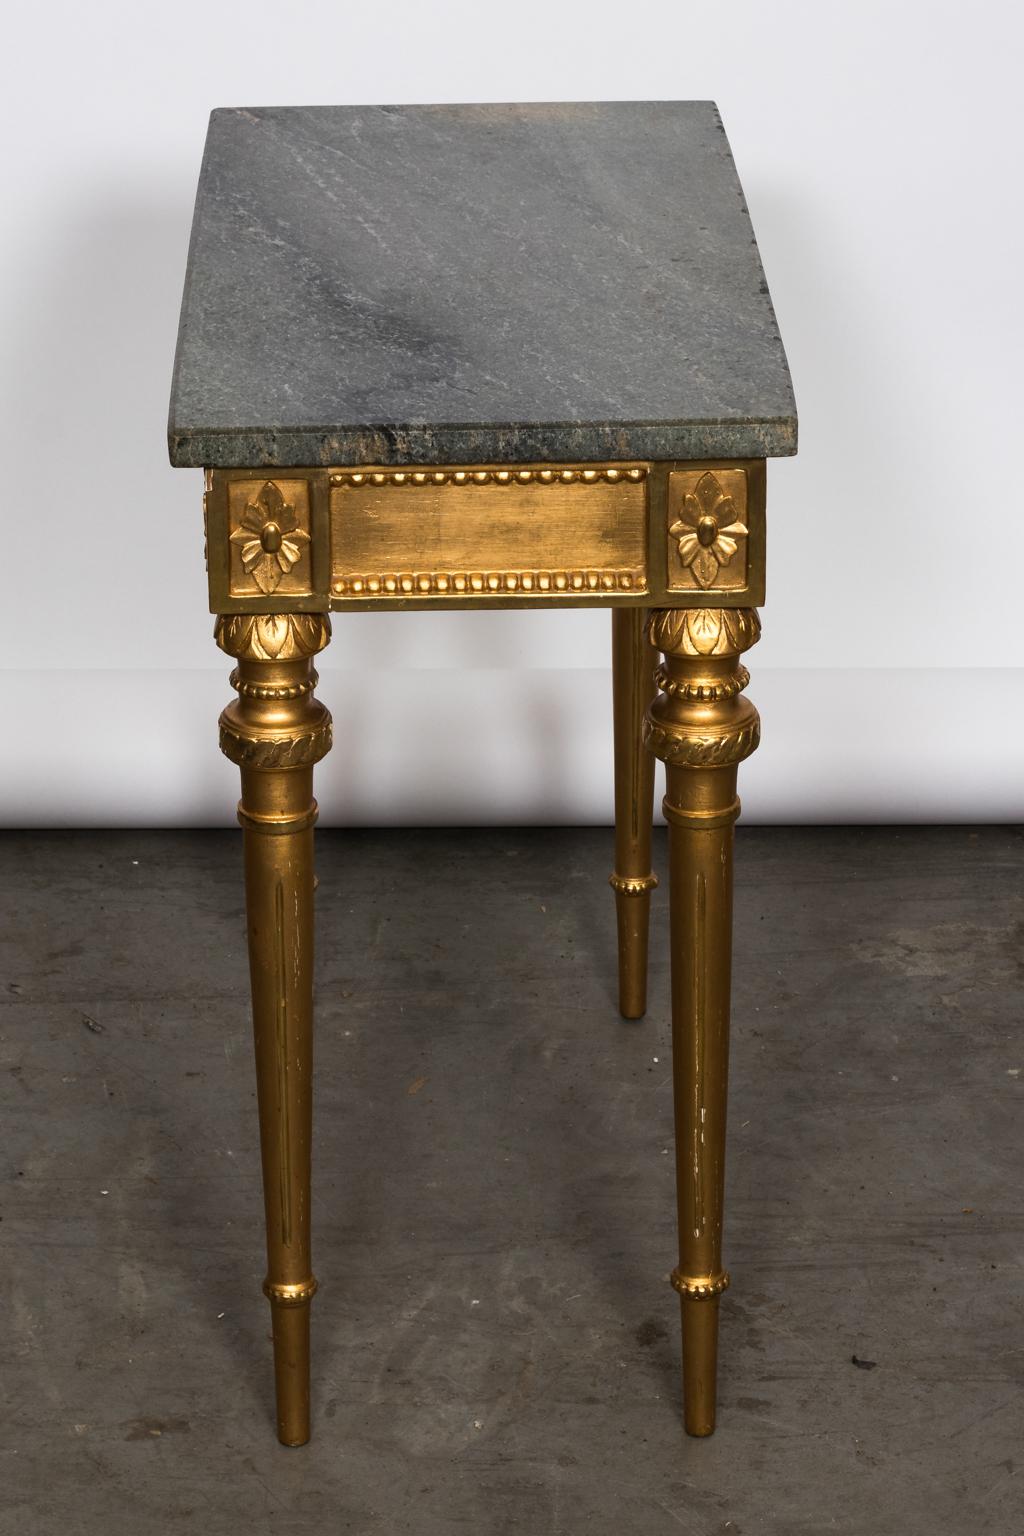 Gustavian style console table with dark stone top and gilded and bronzed wood base, circa late 19th century. The console also features carved beaded trim, rosettes, and arrow turned legs.